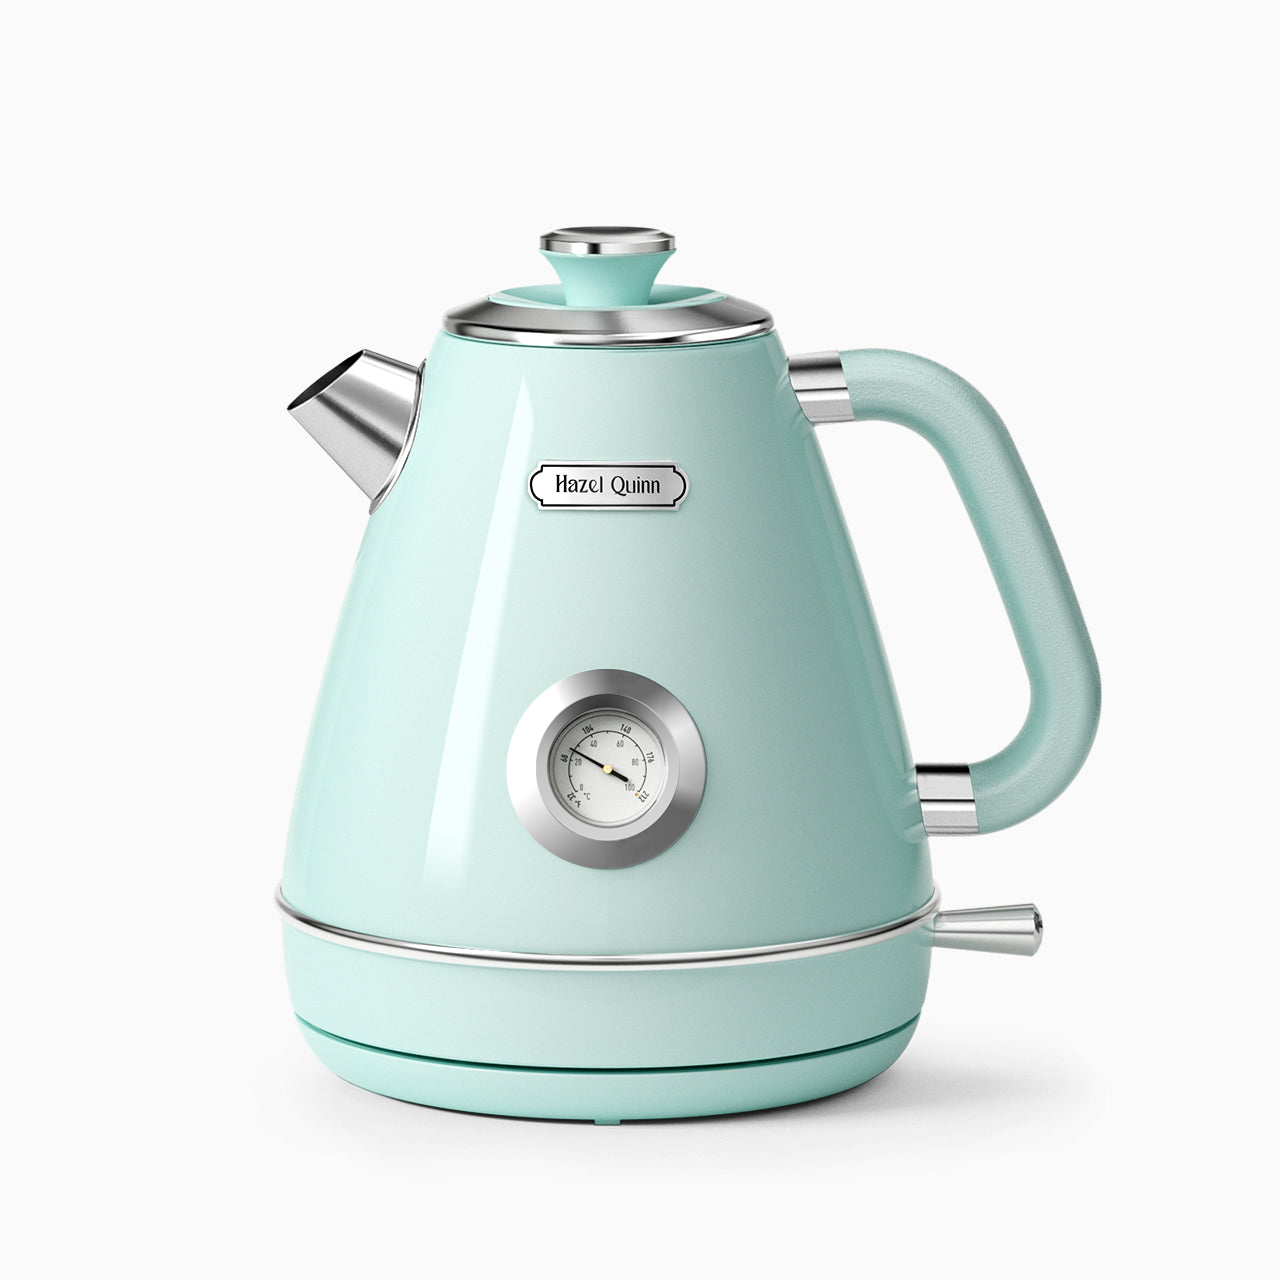 Hazel Quinn Retro Electric Kettle - 1.7 Liters / 57.5 Ounces Tea Kettle with Thermometer, All Stainless Steel, Fast Boiling 1200 W, BPA-Free, Cordless